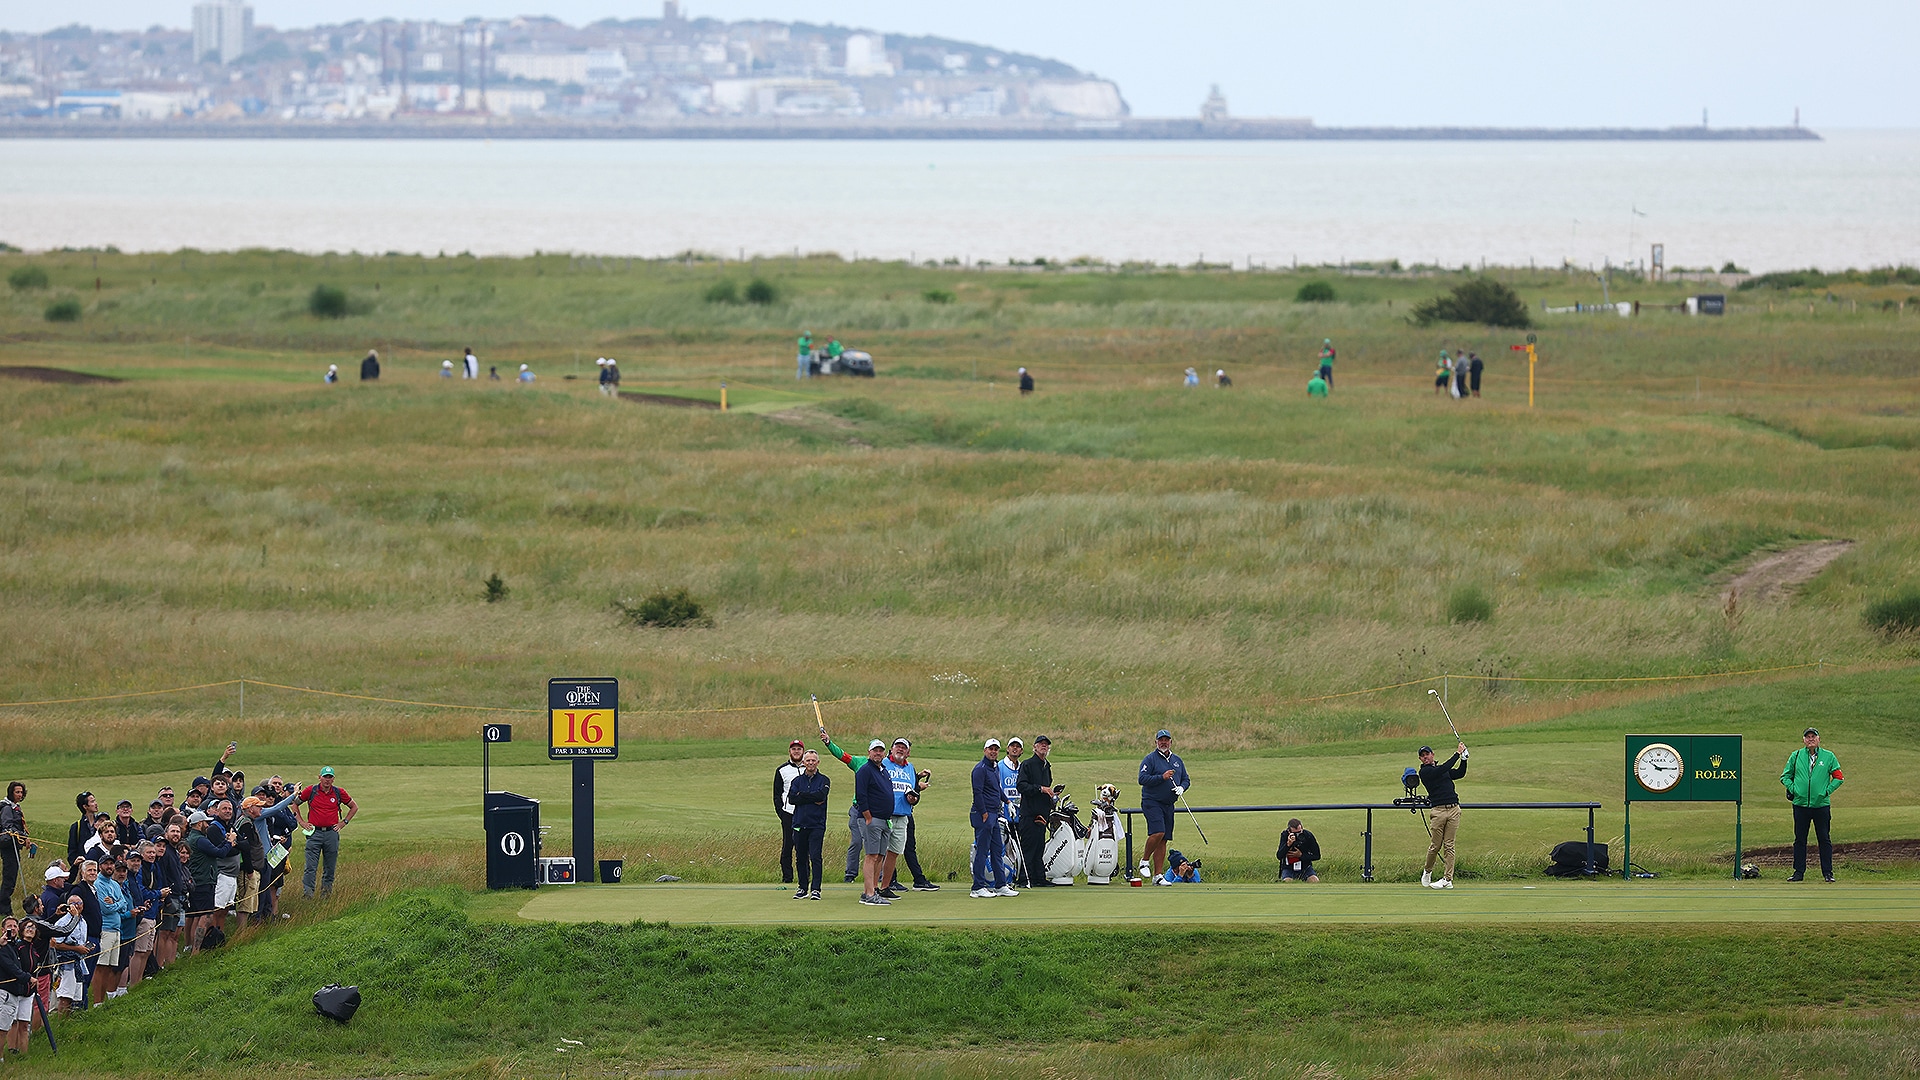 2021 British Open: Weather forecast for the 149th Open: Dry and gusty at Royal St. George’s